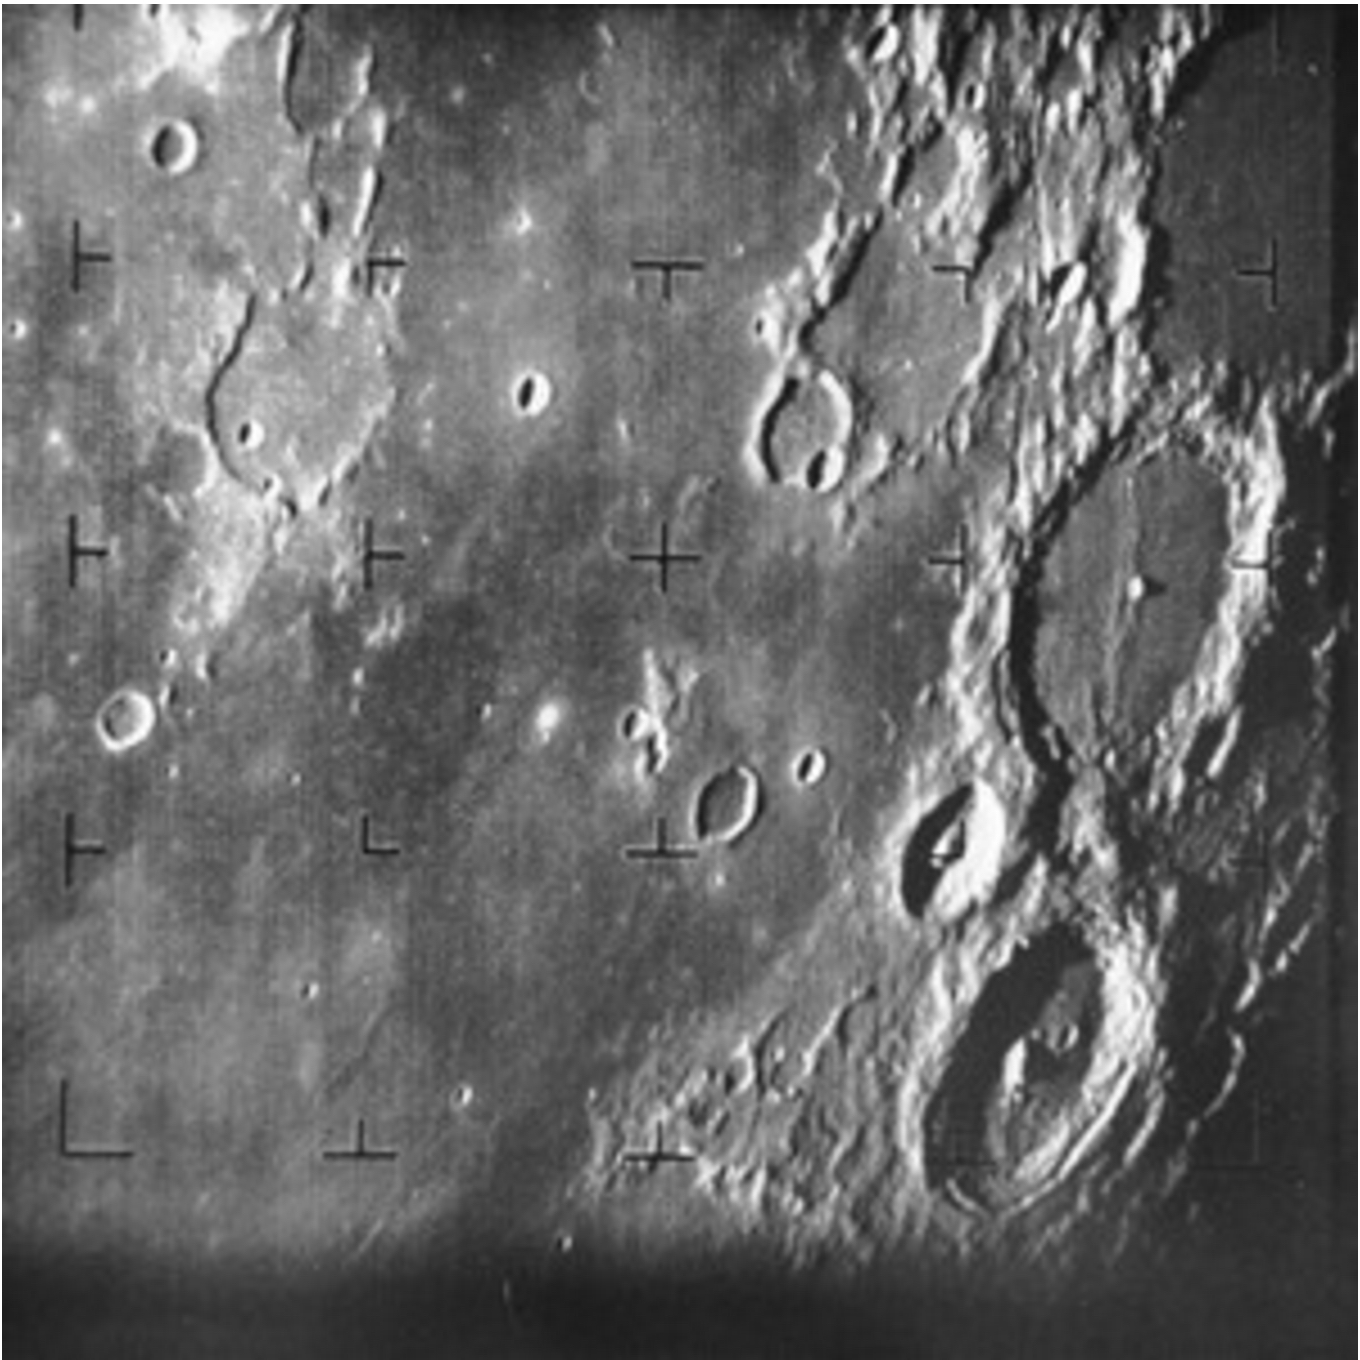 Ranger 7: First U.S. Close-Ups of the Moon | Space